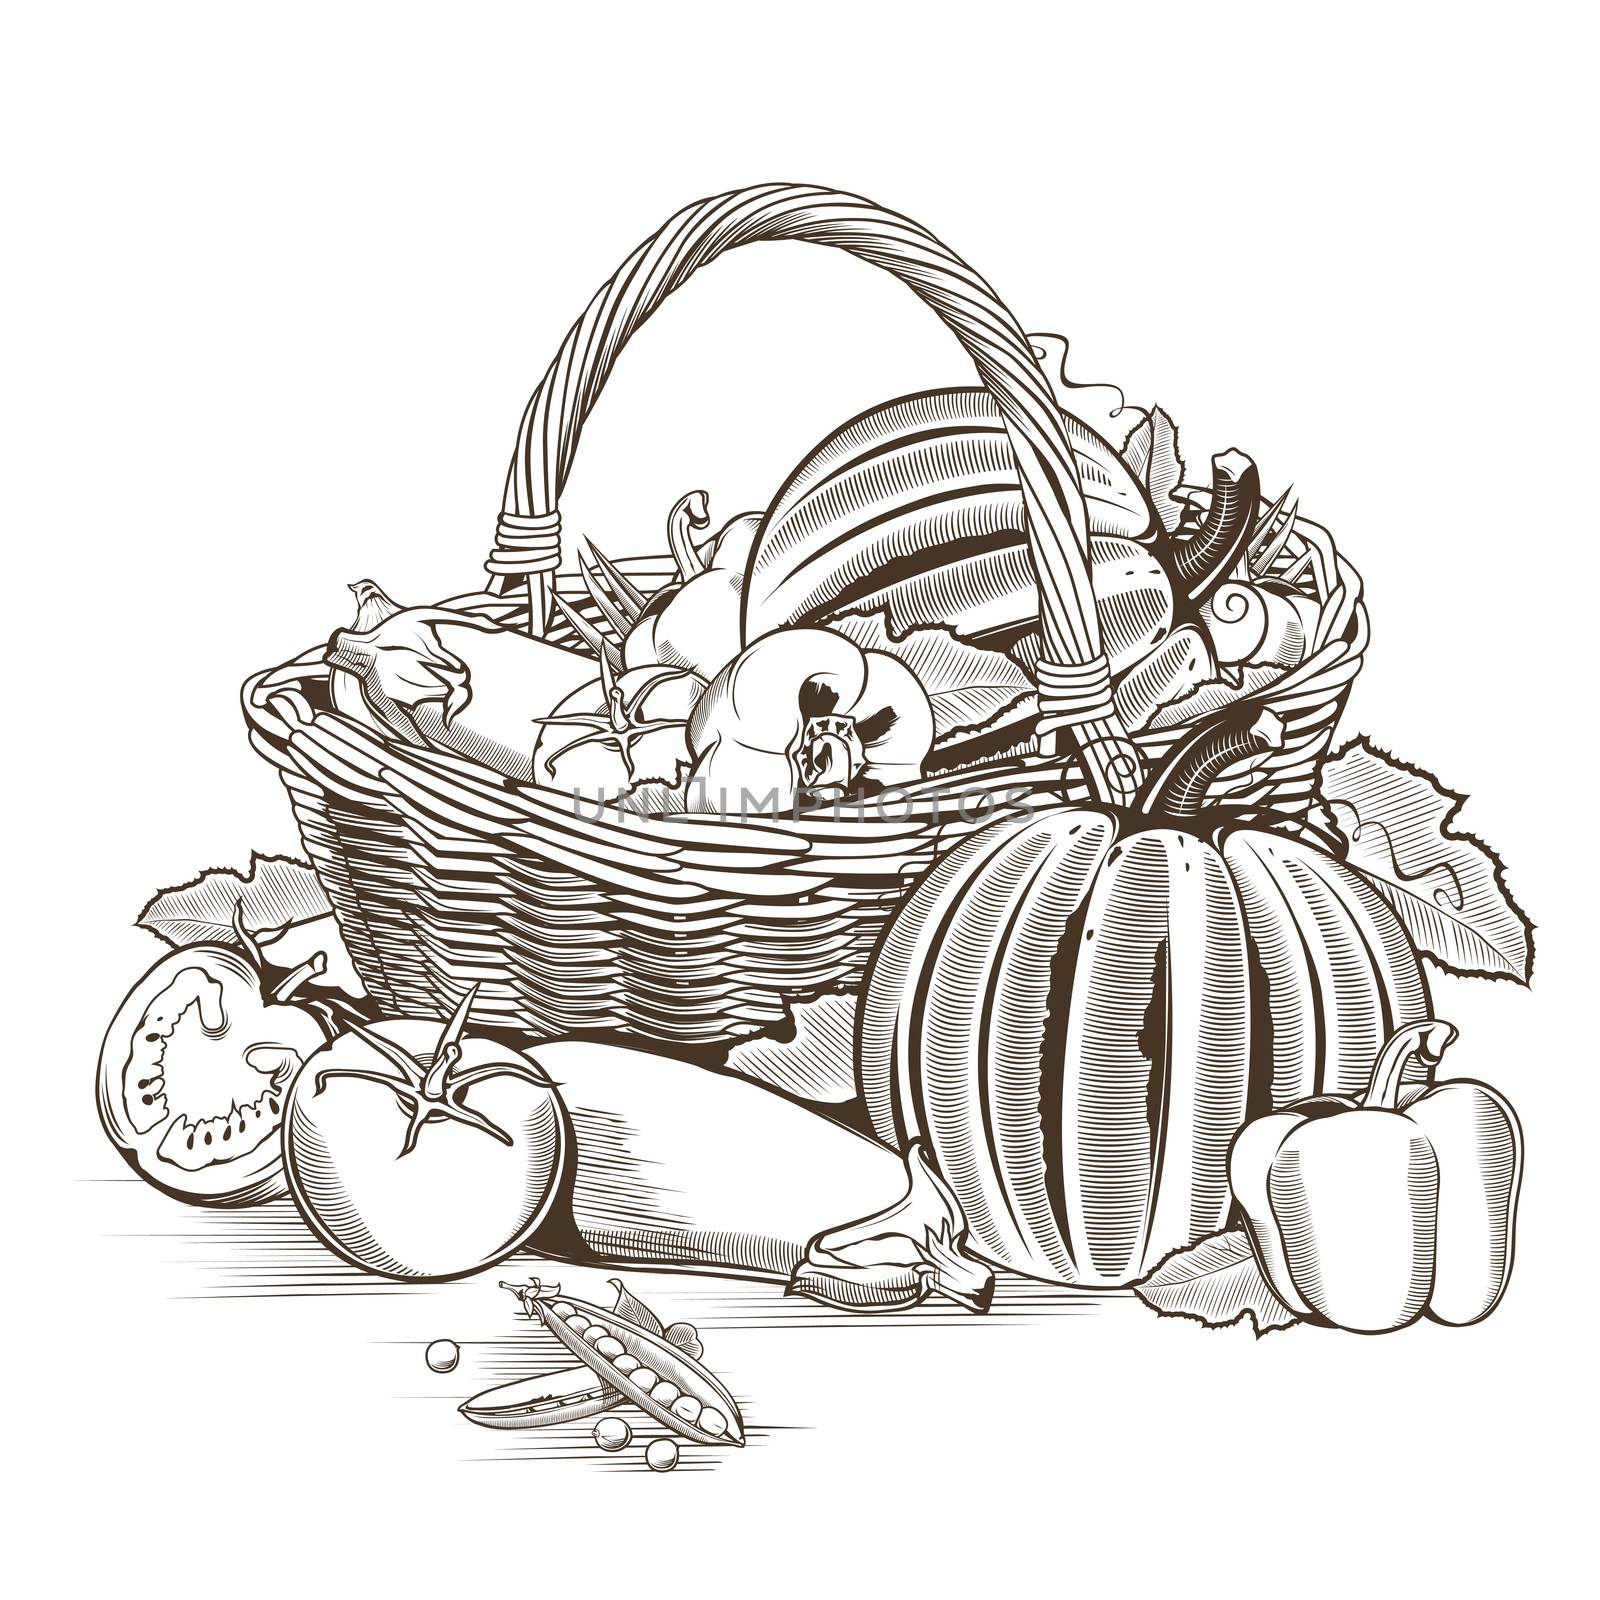 Vegetable basket on white background in woodcut style.